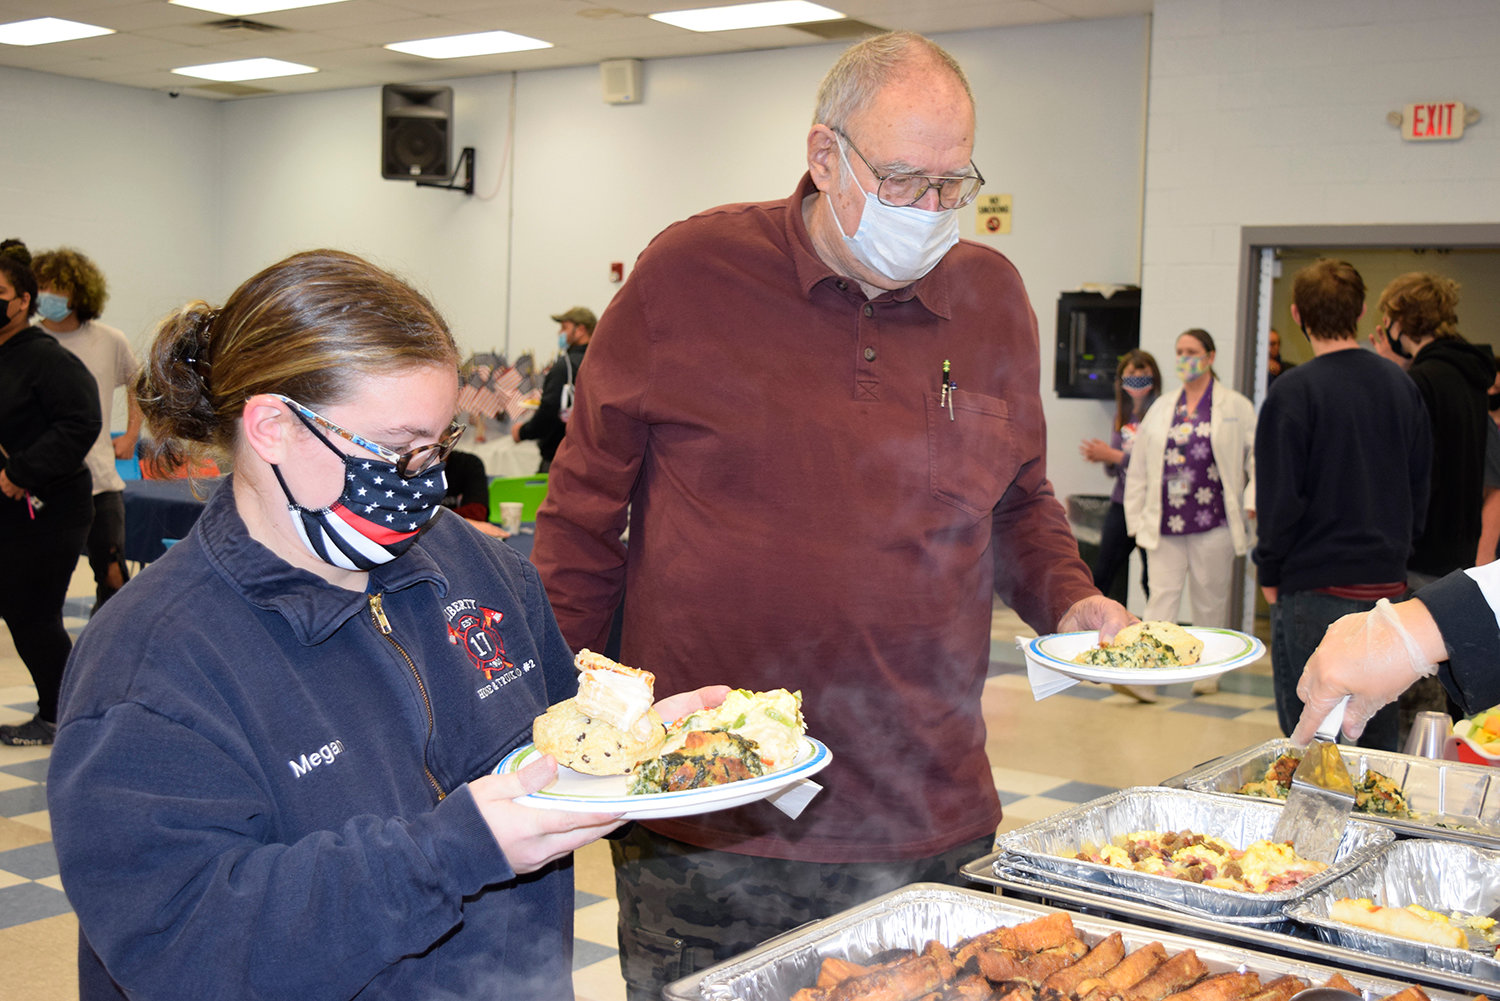 Eating together. Students and staff from Sullivan BOCES mingled with area veterans at a recent brunch. It was a chance for young people to learn from those who served.